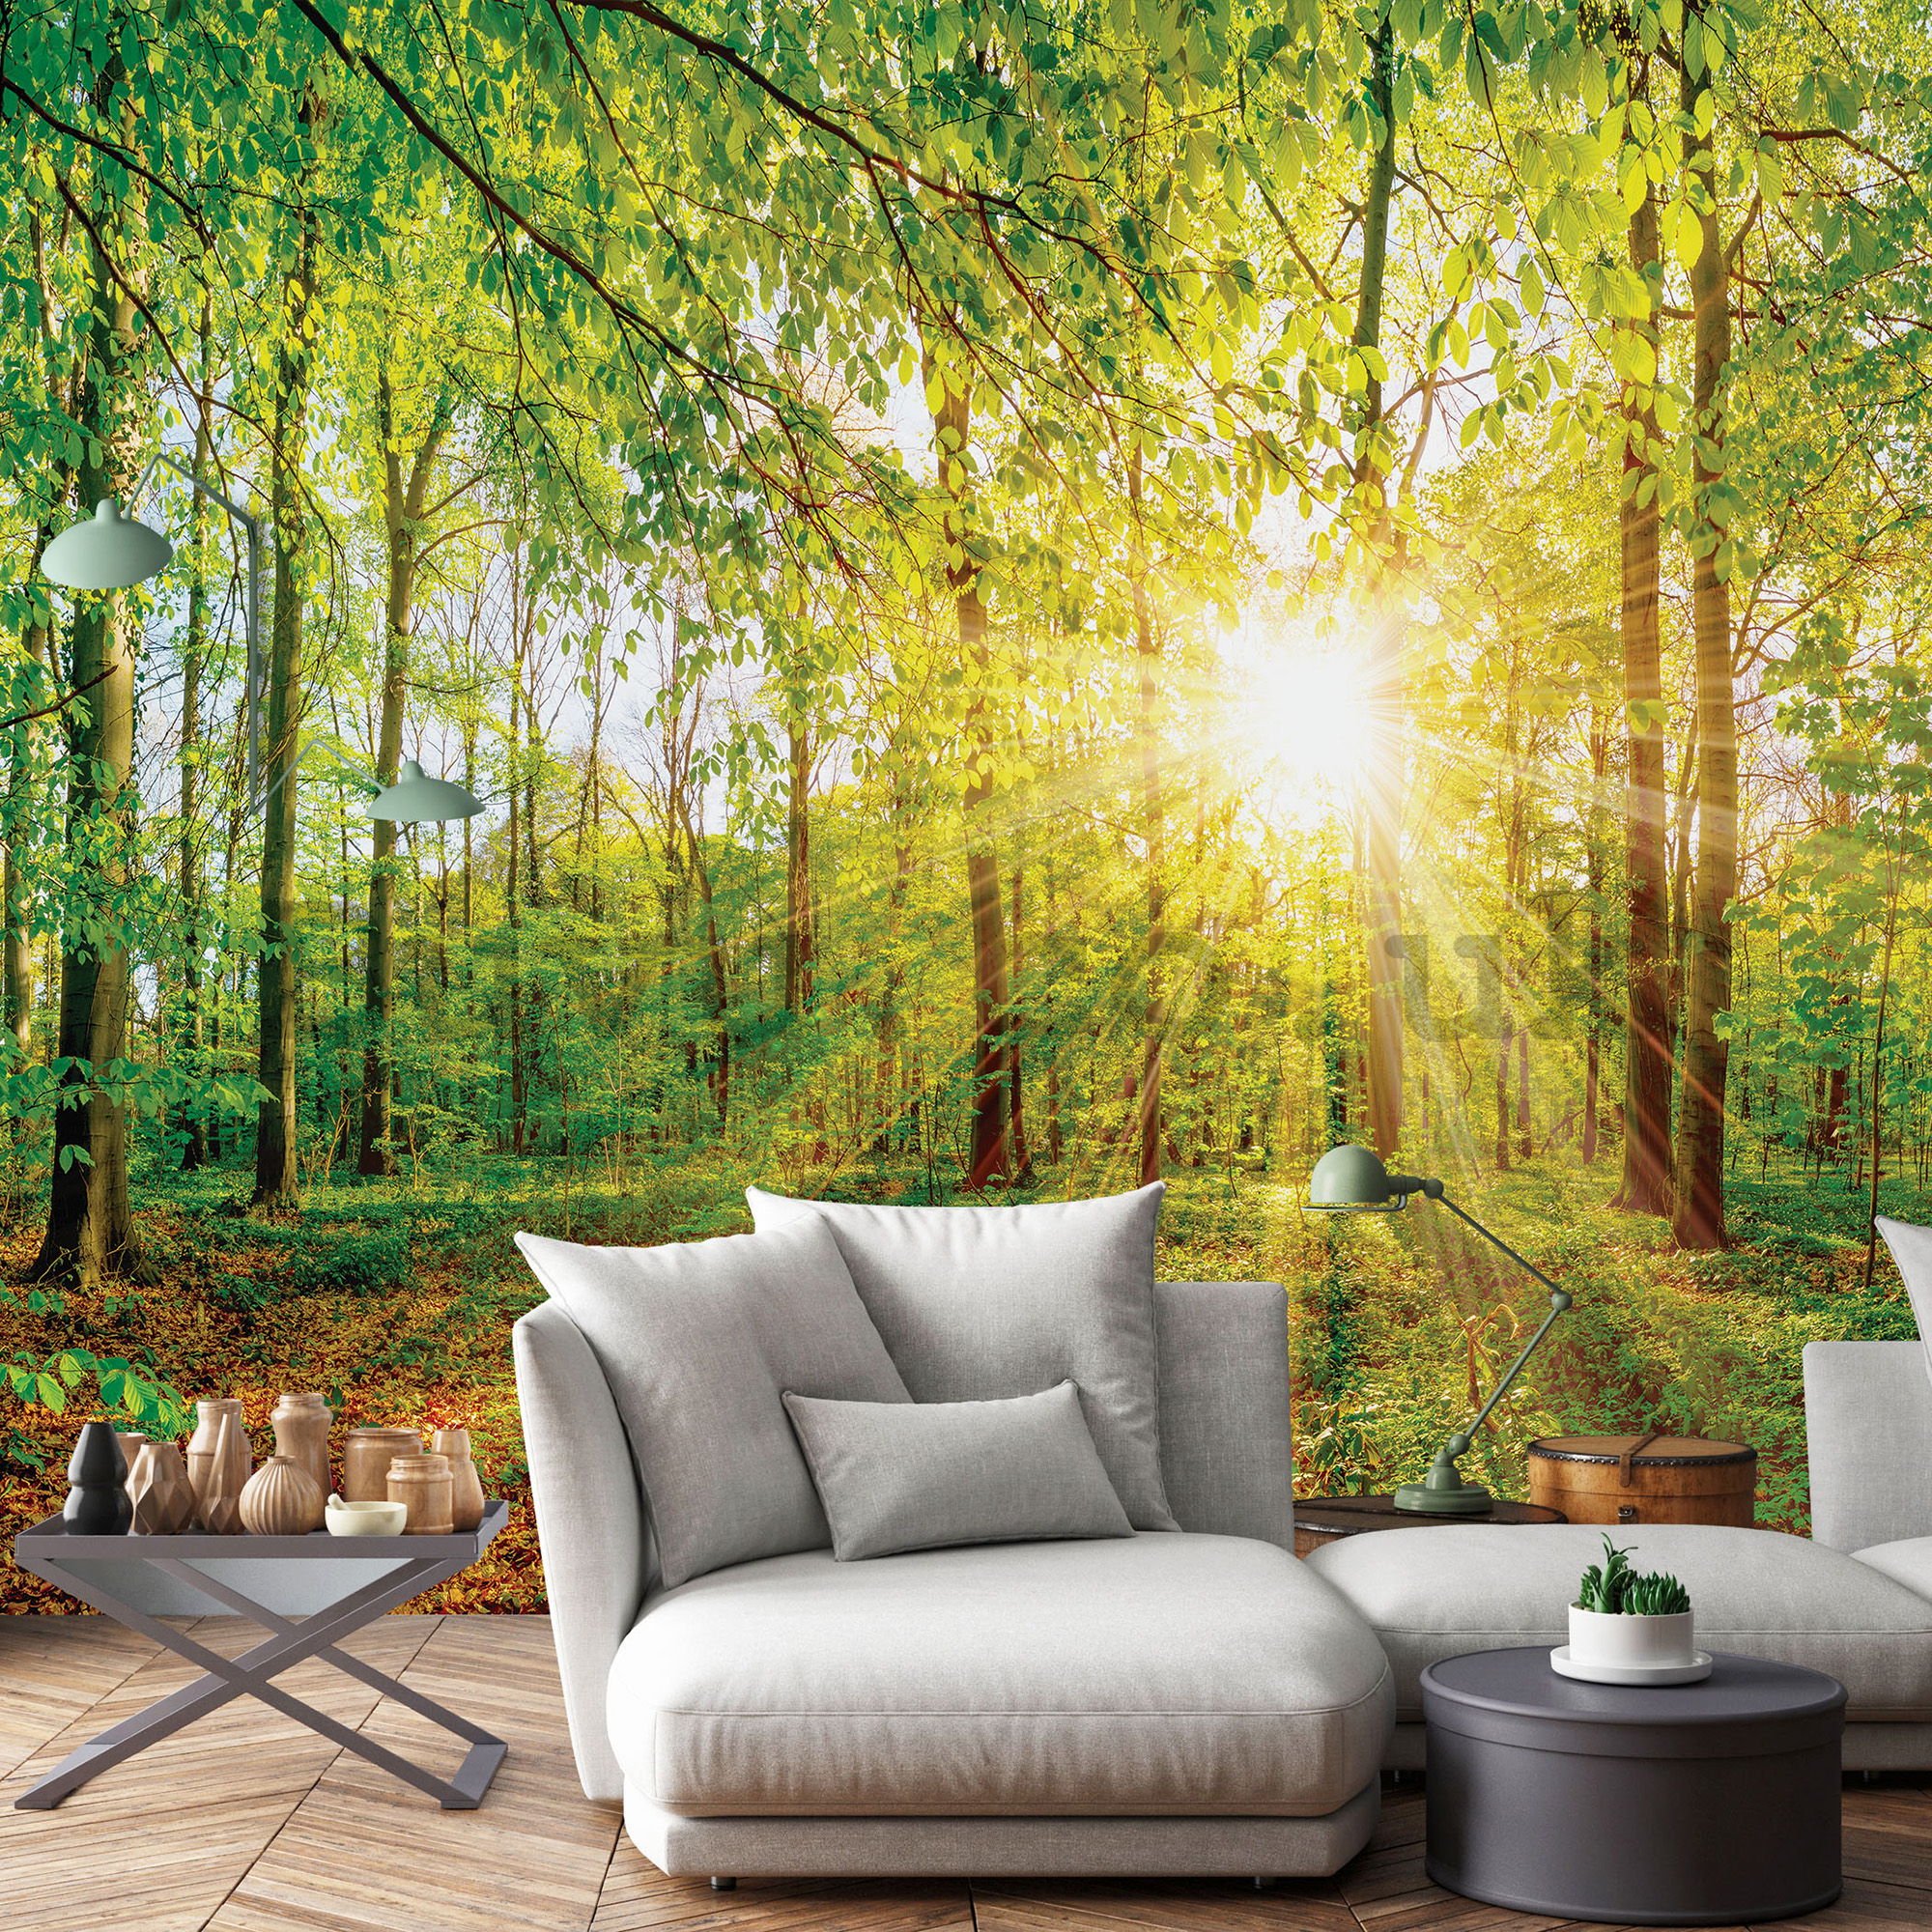 Wall mural vlies: View of the forest - 416x254 cm